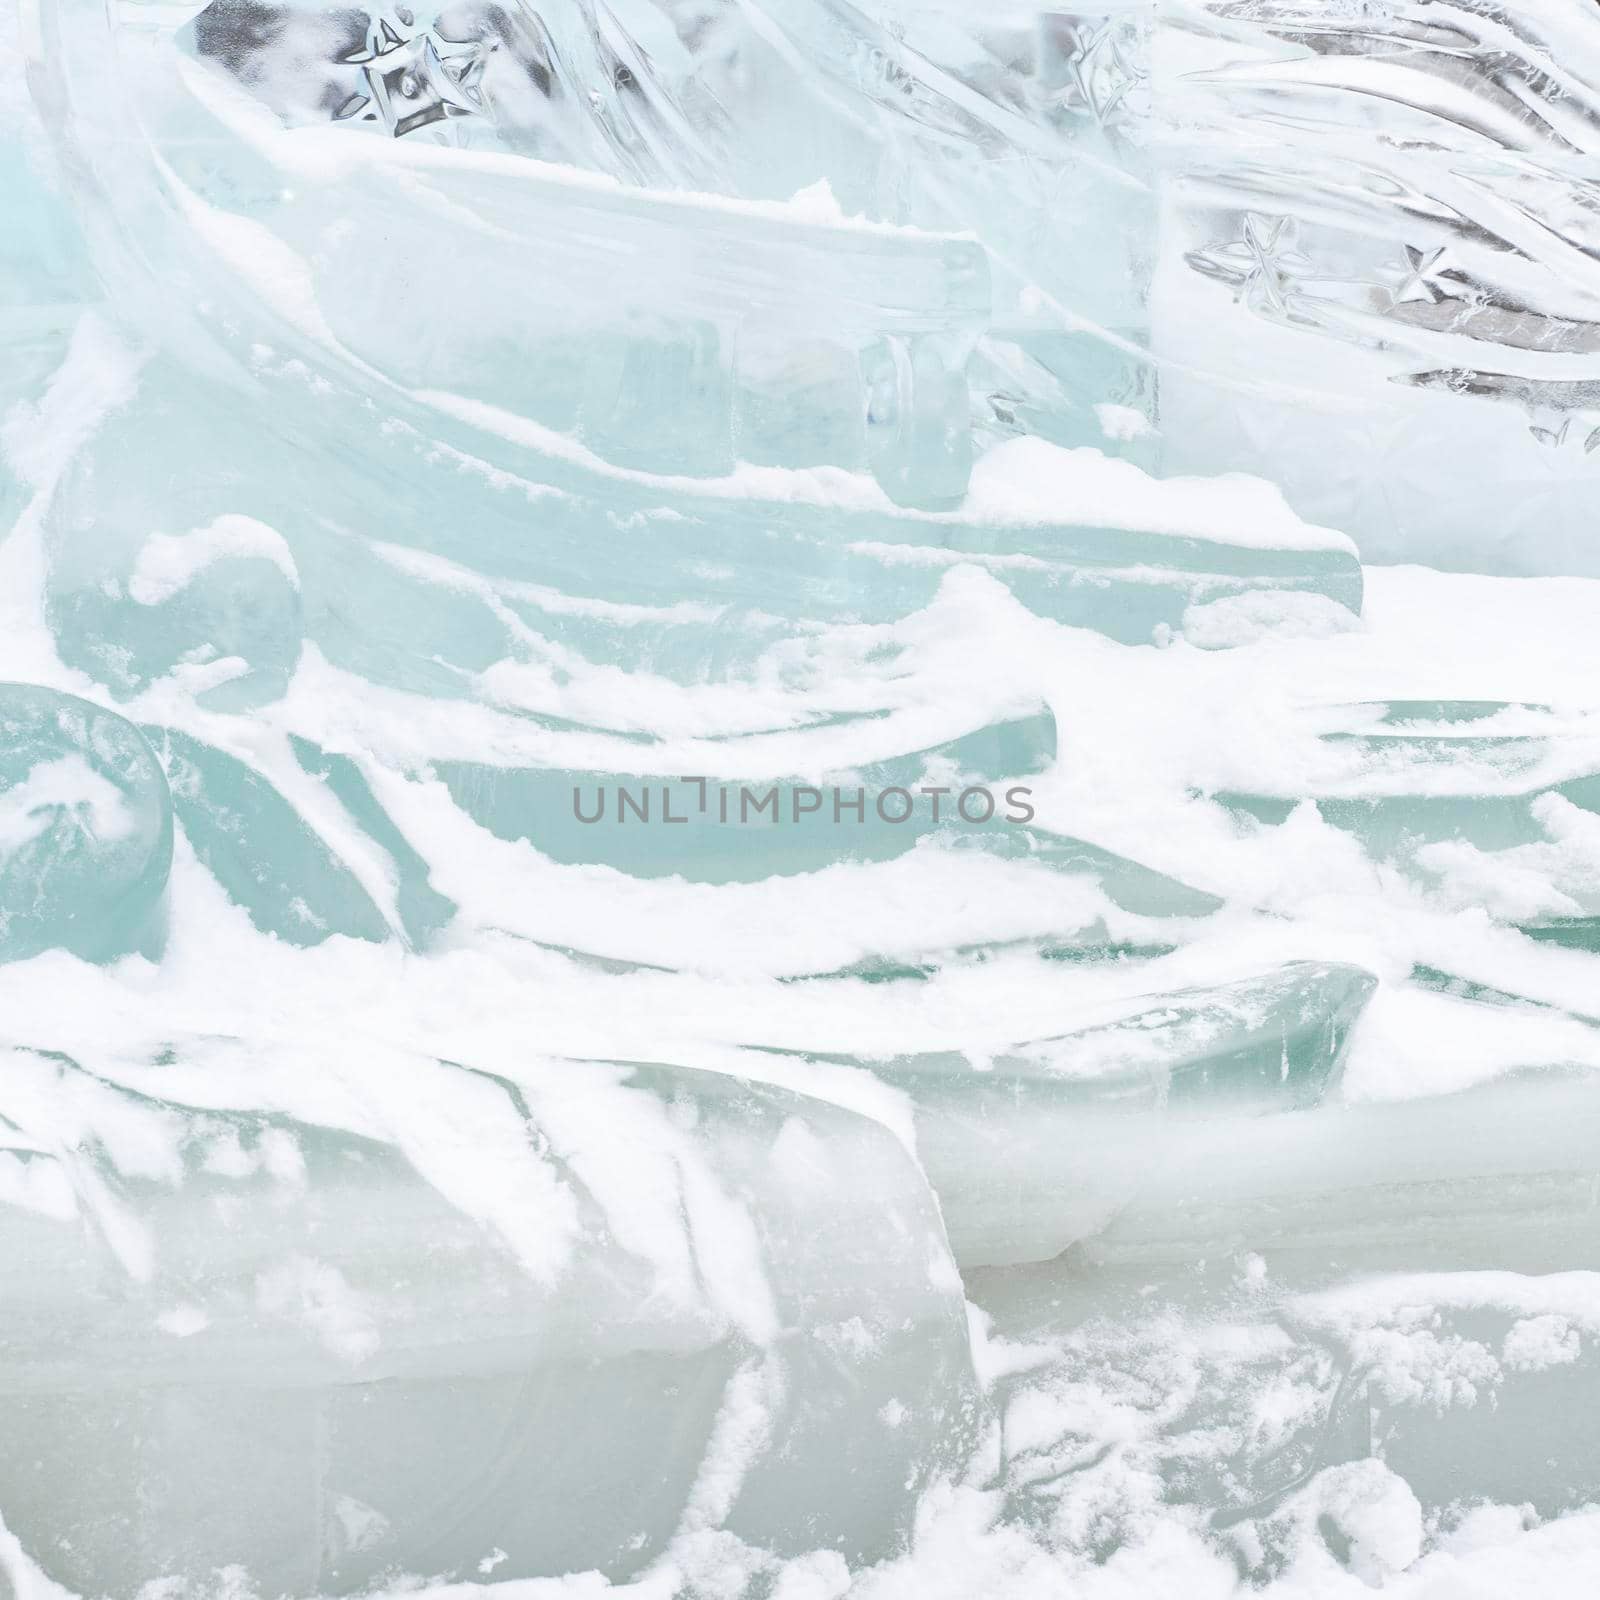 Ice texture background. Textured cold frosty surface of ice by Lena_Ogurtsova